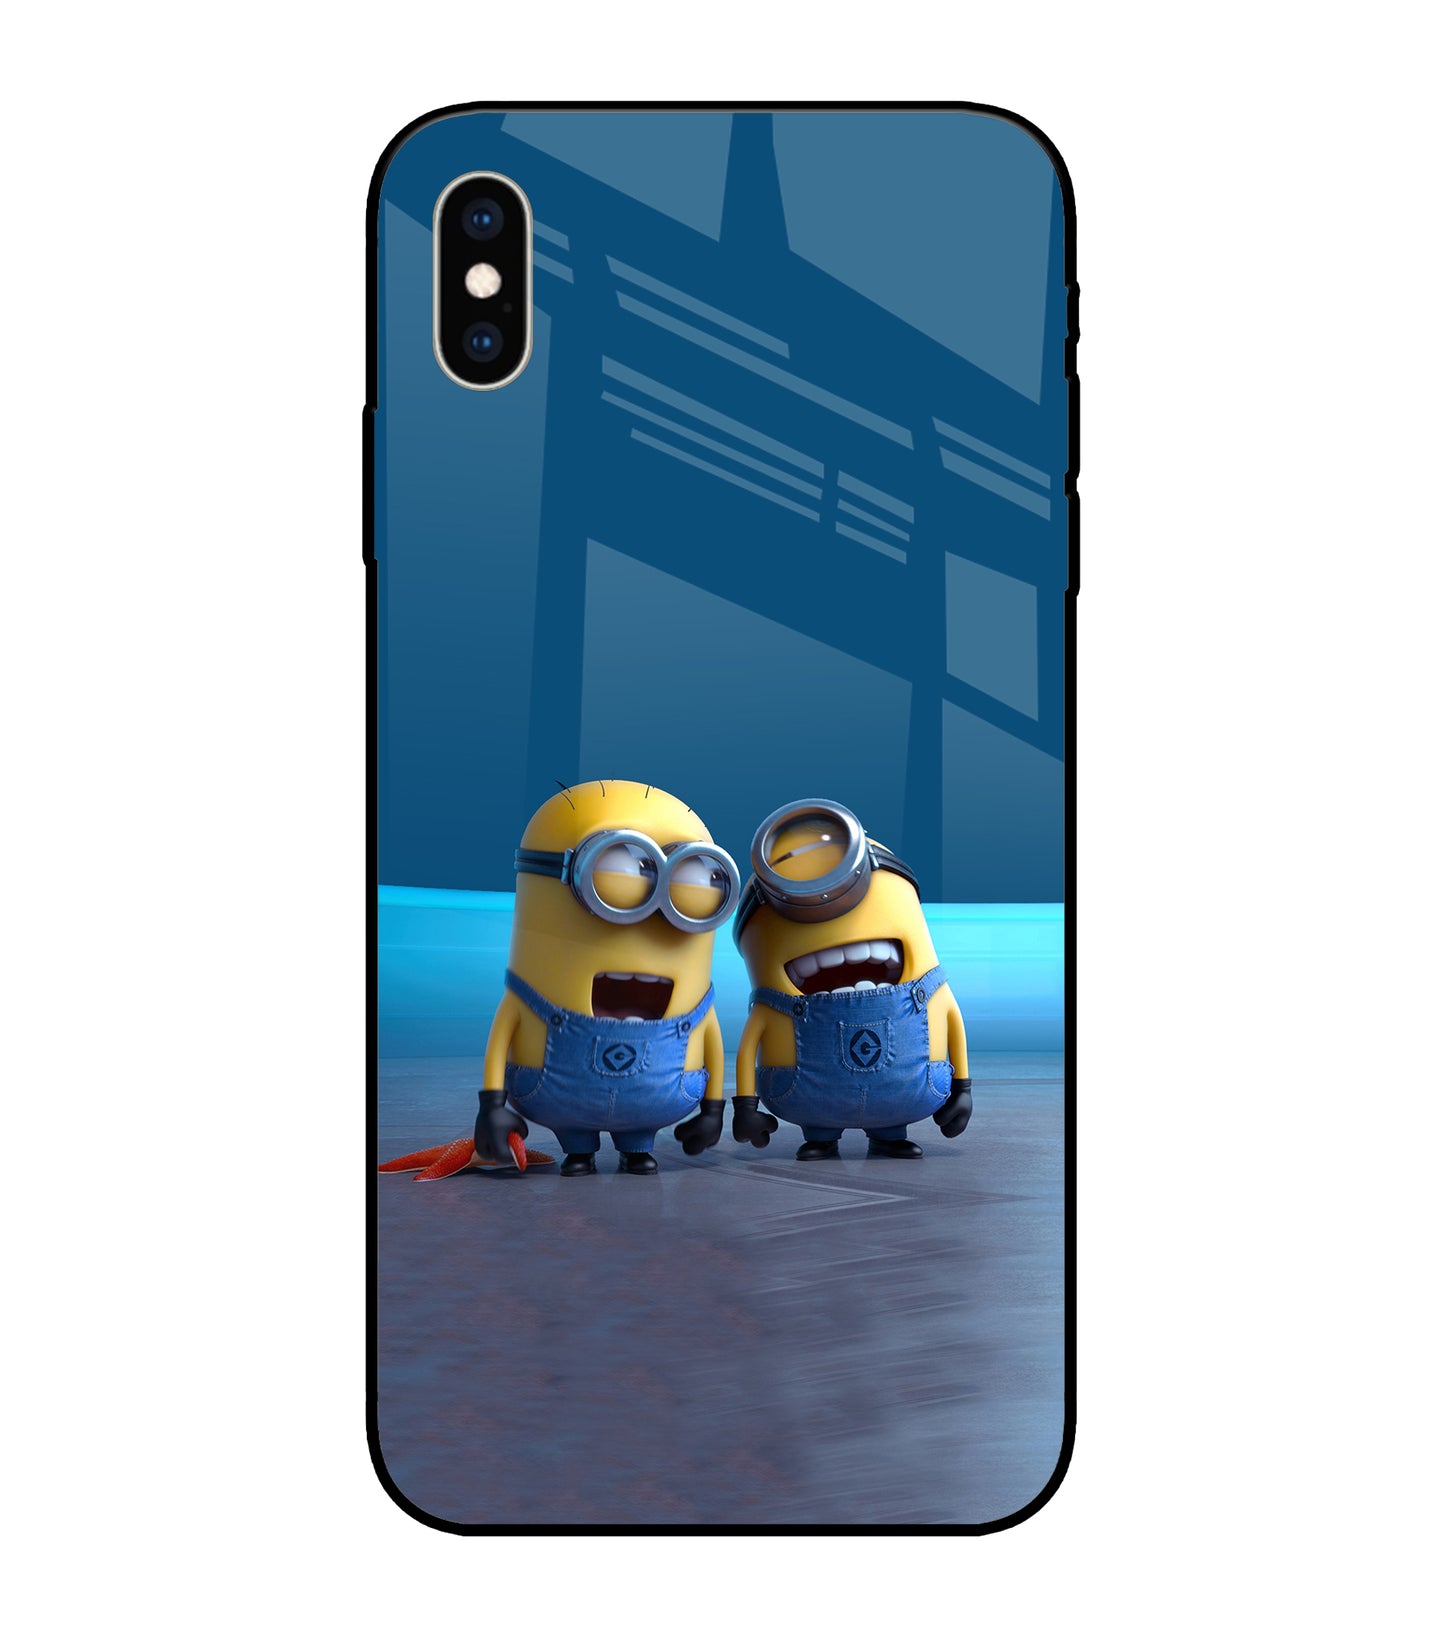 Minion Laughing iPhone XS Max Glass Cover